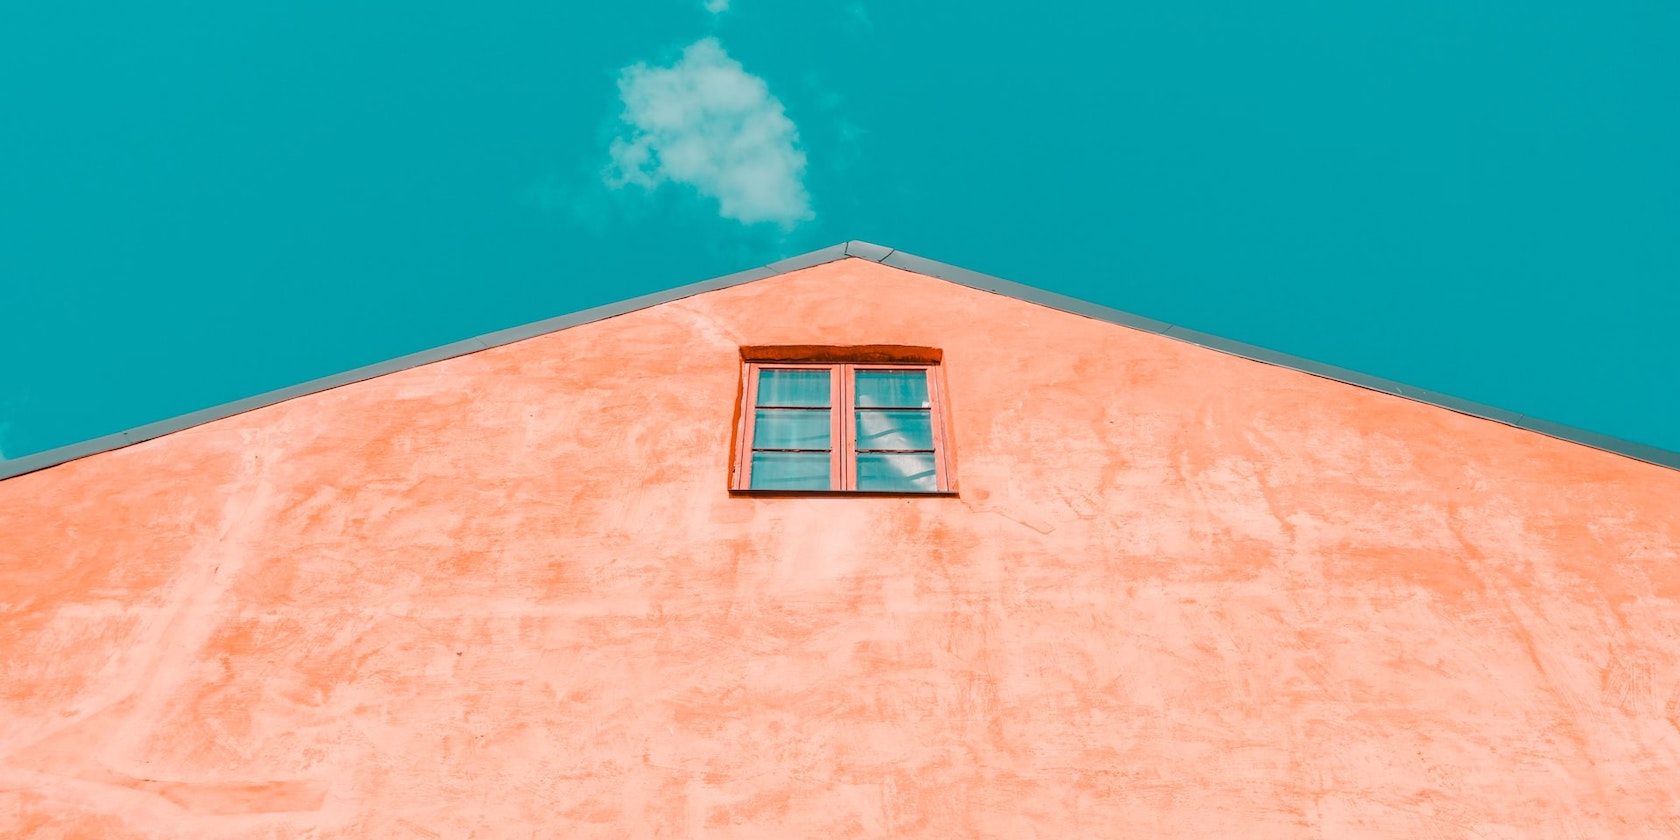 A low angle photo of a pink building against a blue sky